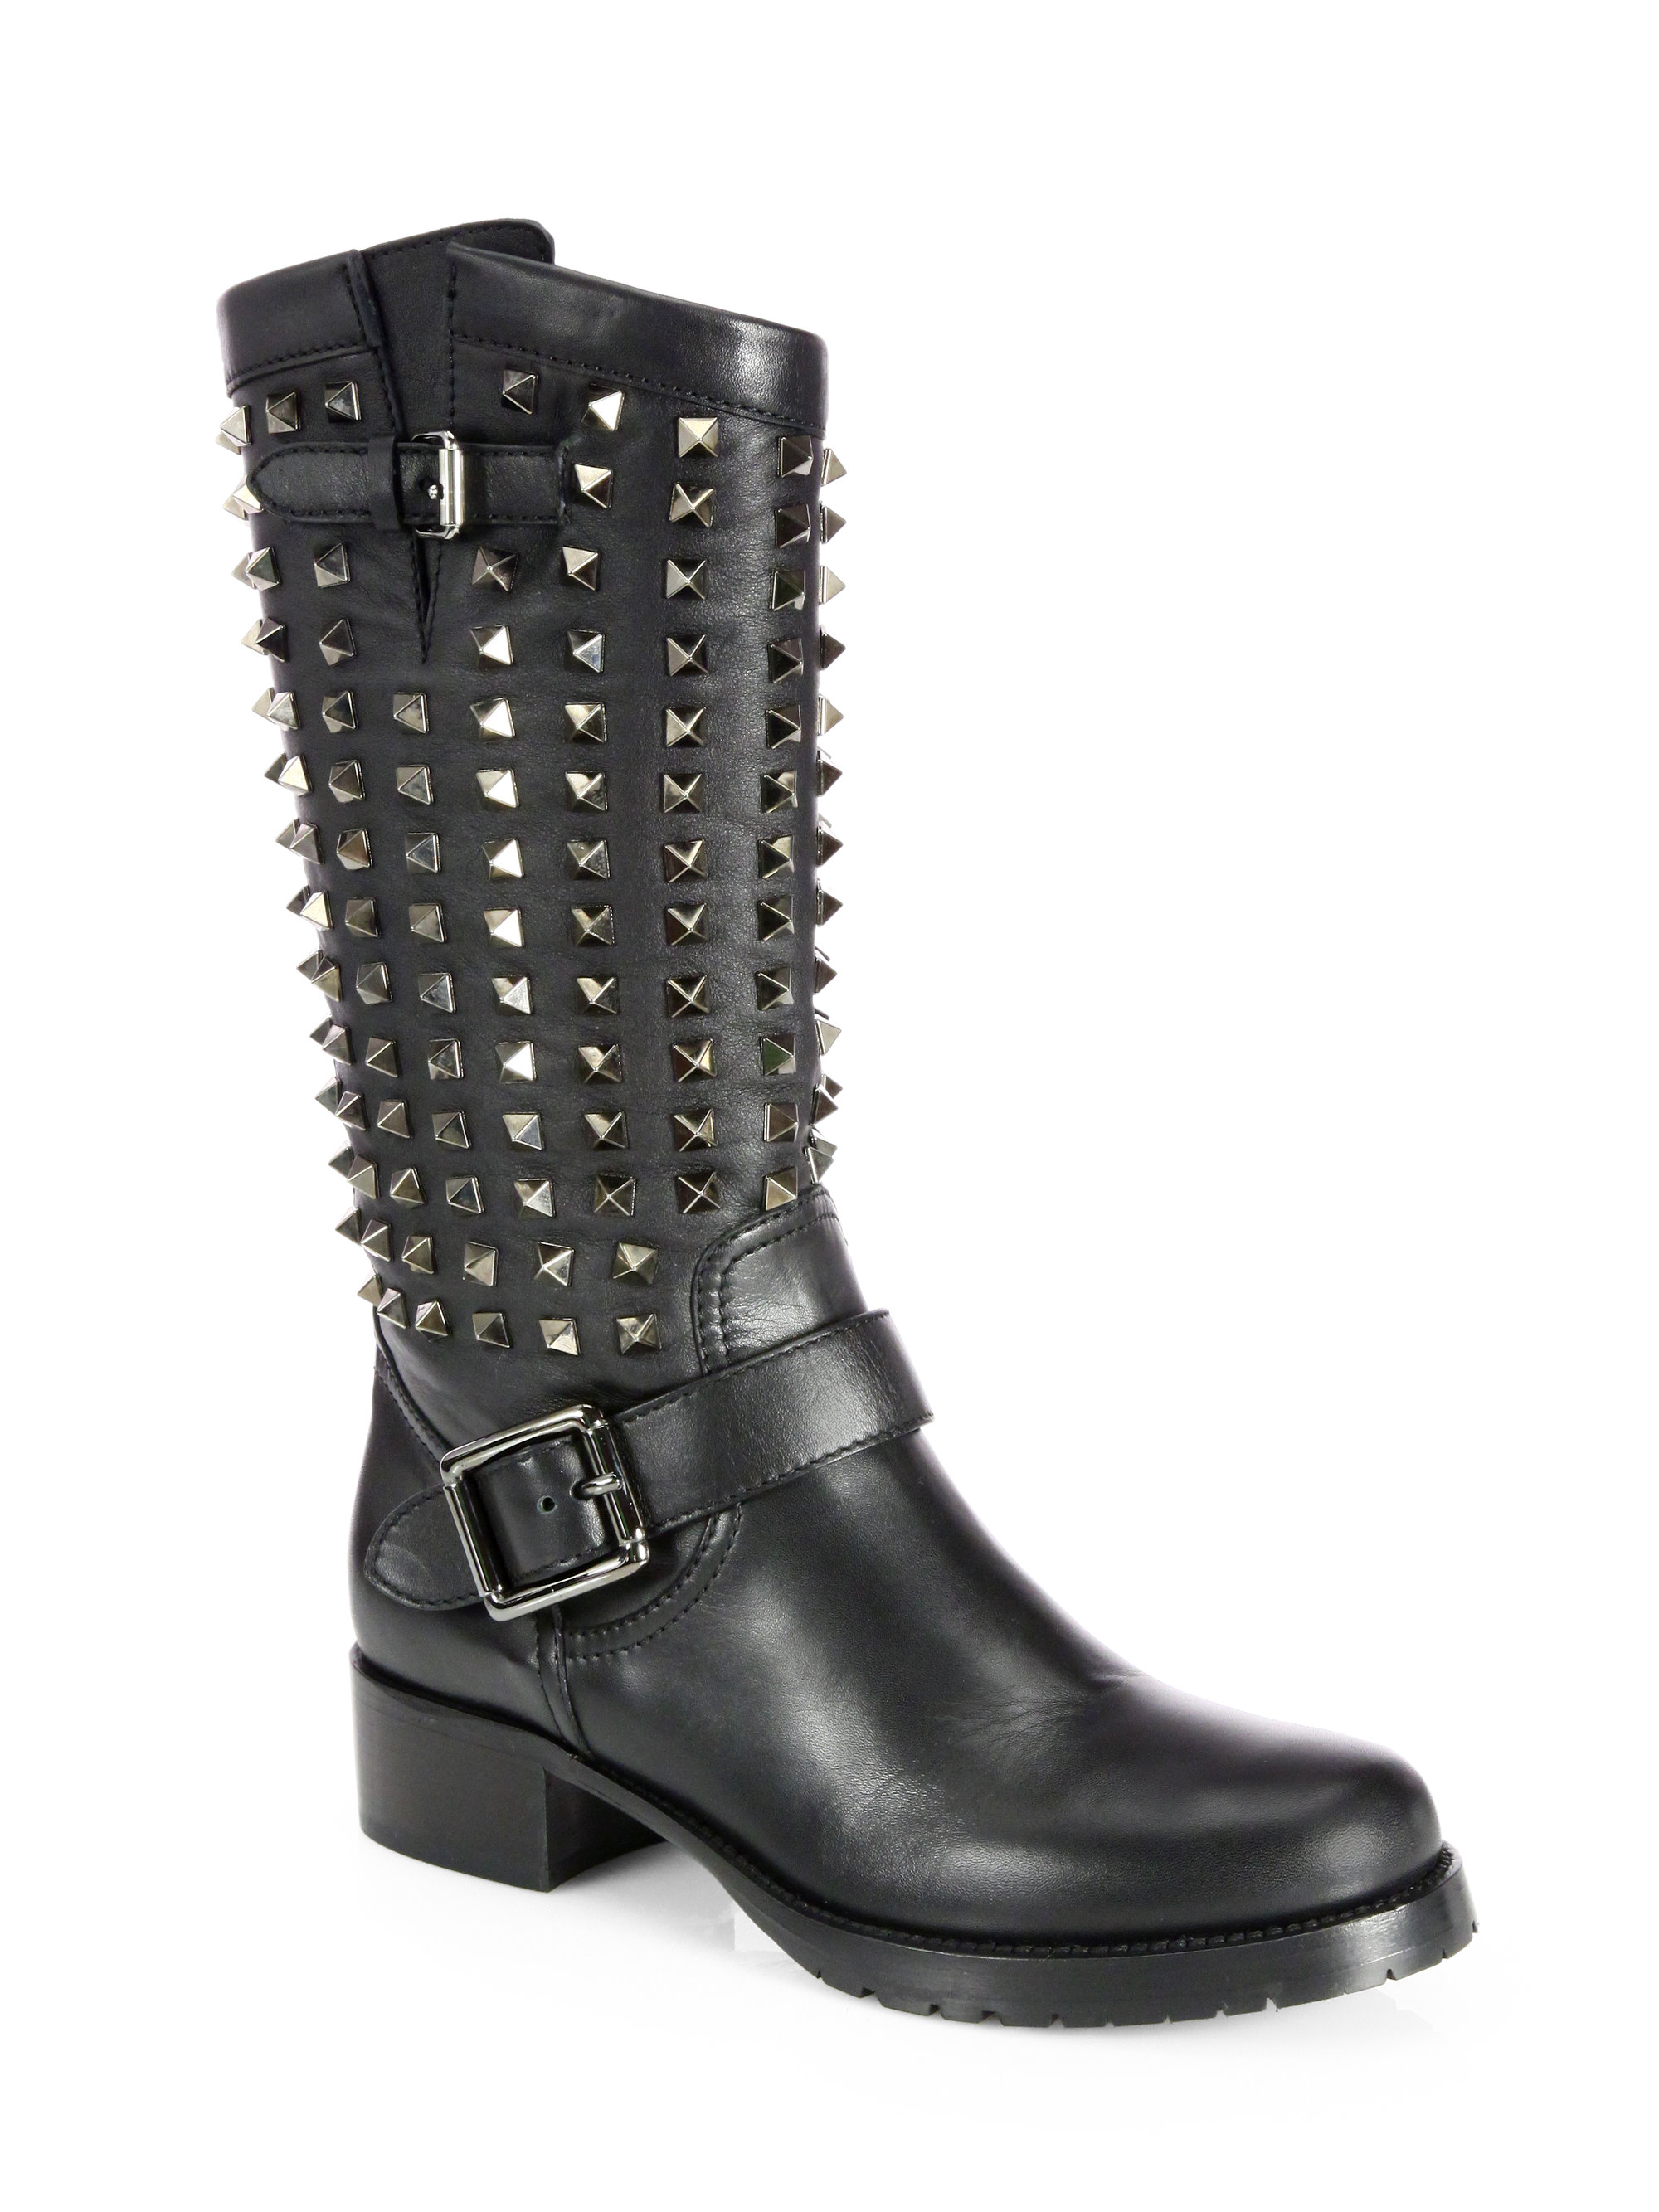 Valentino Noir Rockstud Leather Midcalf Moto Boots in Black | Lyst